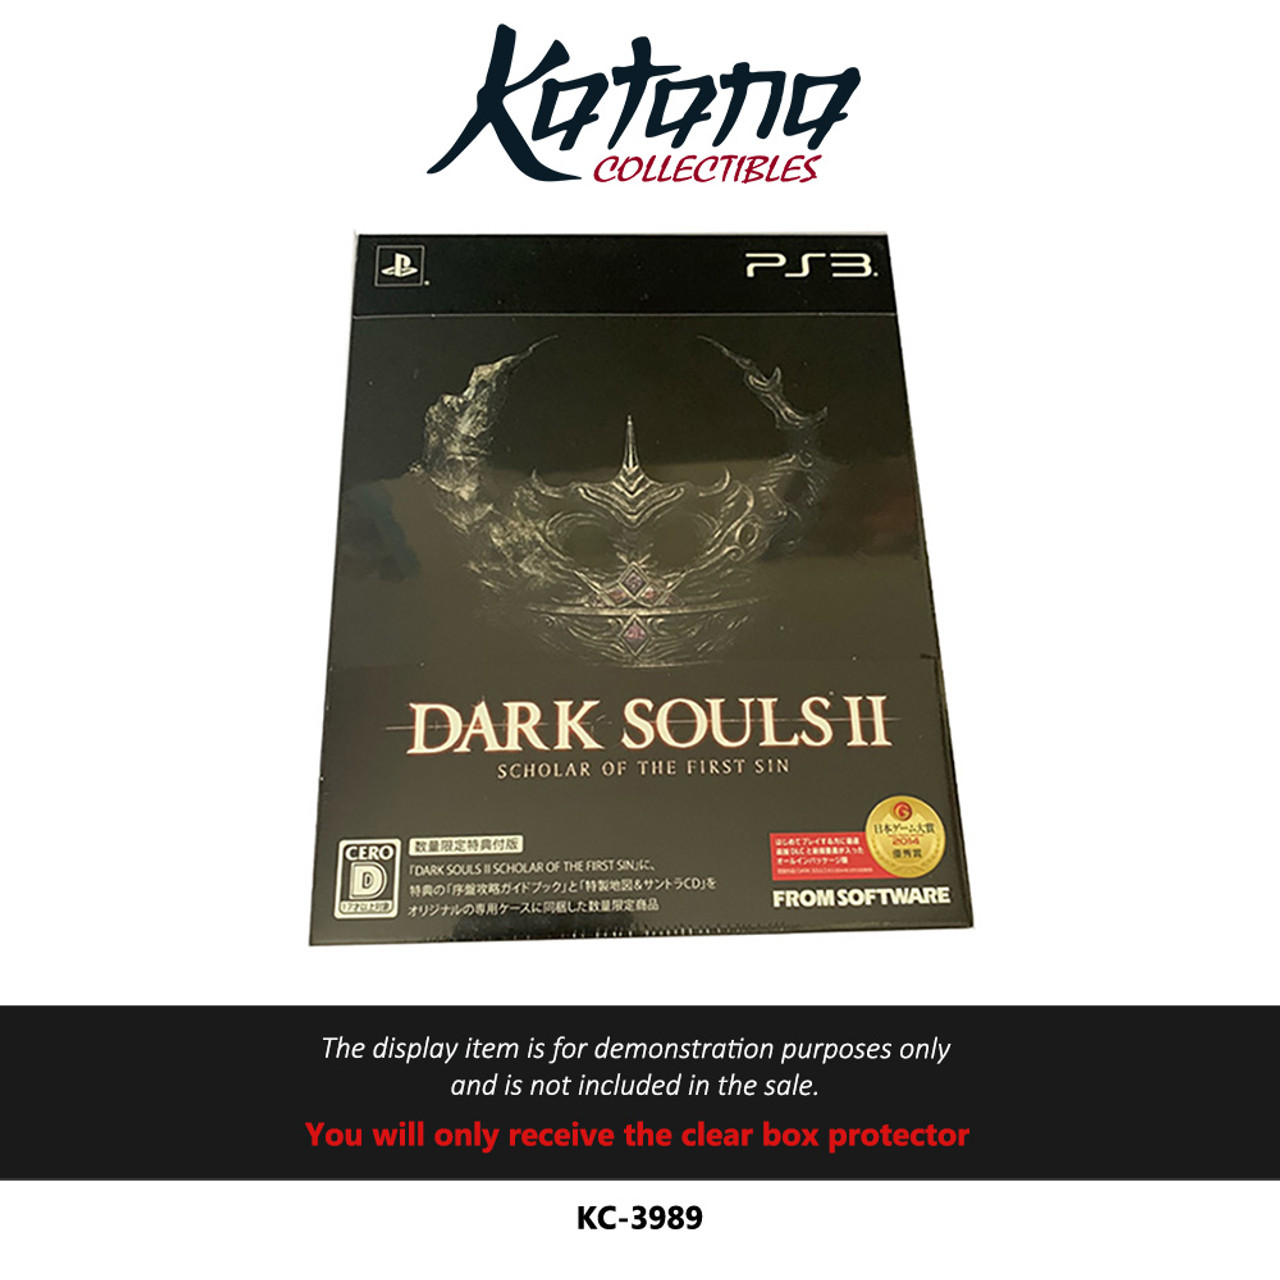 Katana Collectibles Protector For Dark Souls 2 Scholar of the First Sin (Japanese)